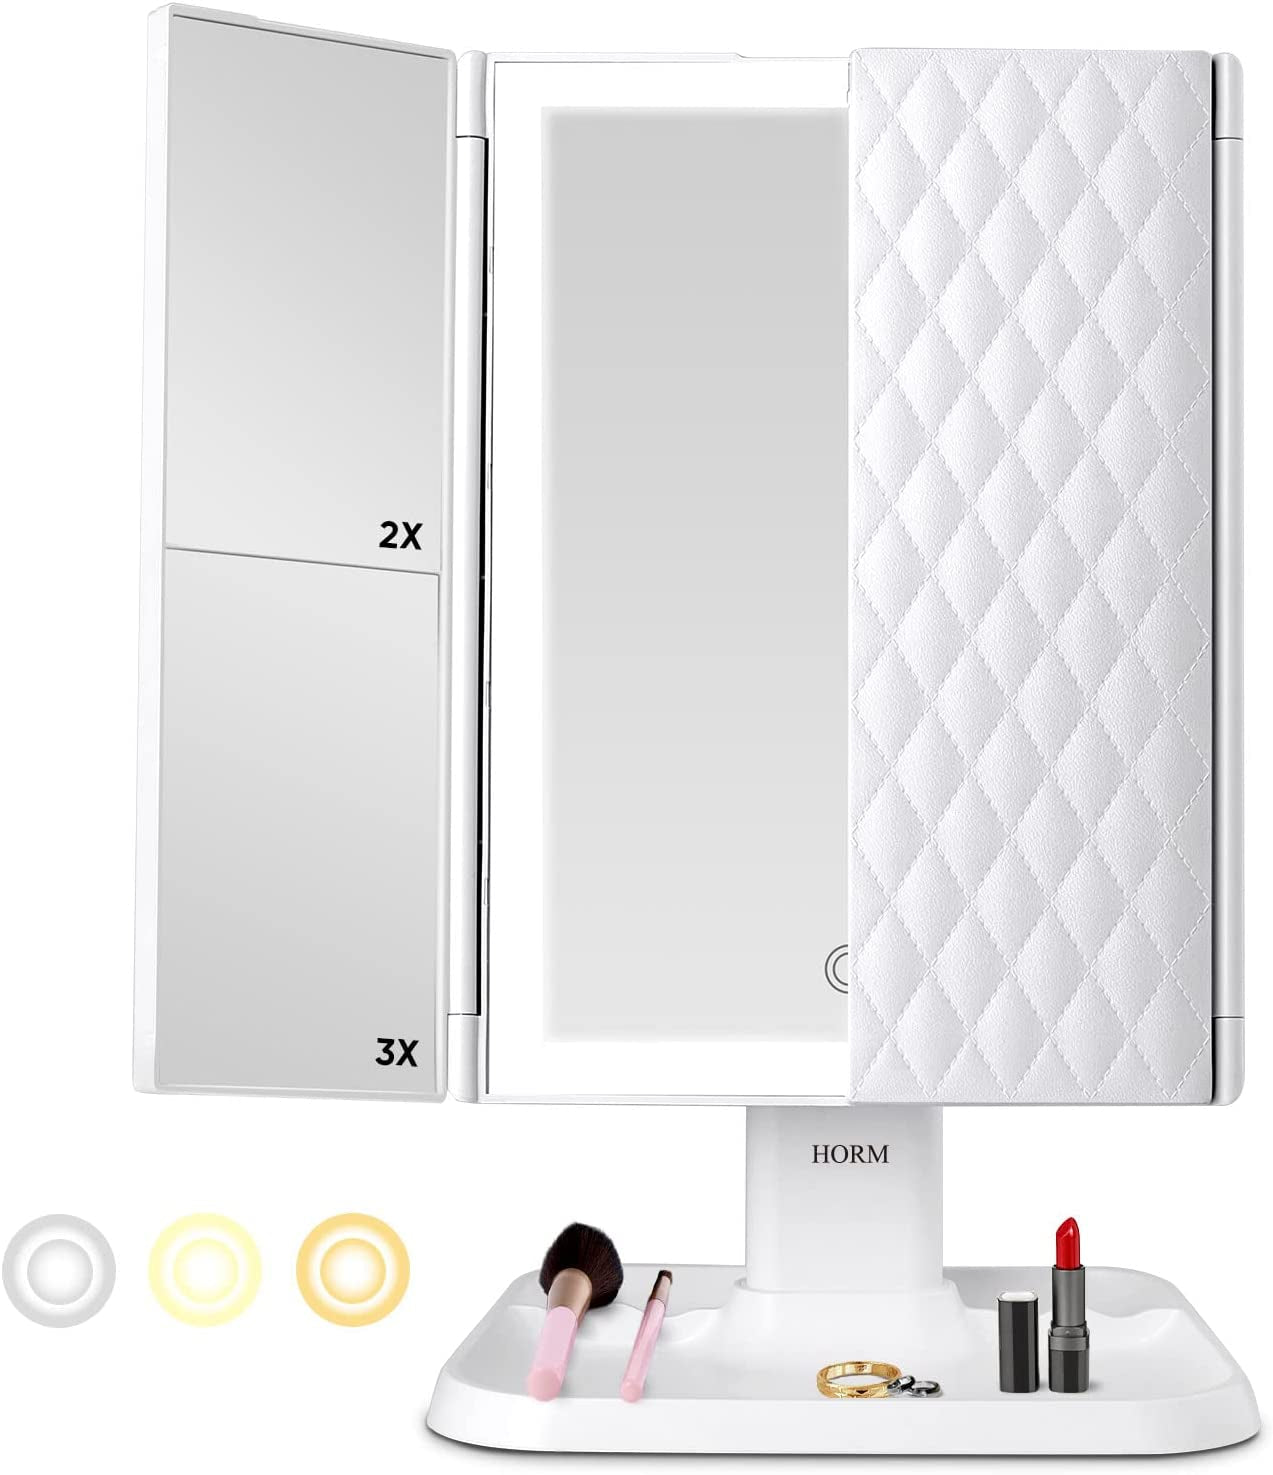 "Illuminate Your Beauty with the HORM Makeup Mirror Vanity - Trifold Mirror with 3 Color Lighting Modes, 72 LED Lights, and Multiple Magnifications for a Flawless Look - Touch Control, Portable and High Definition - JING-007"